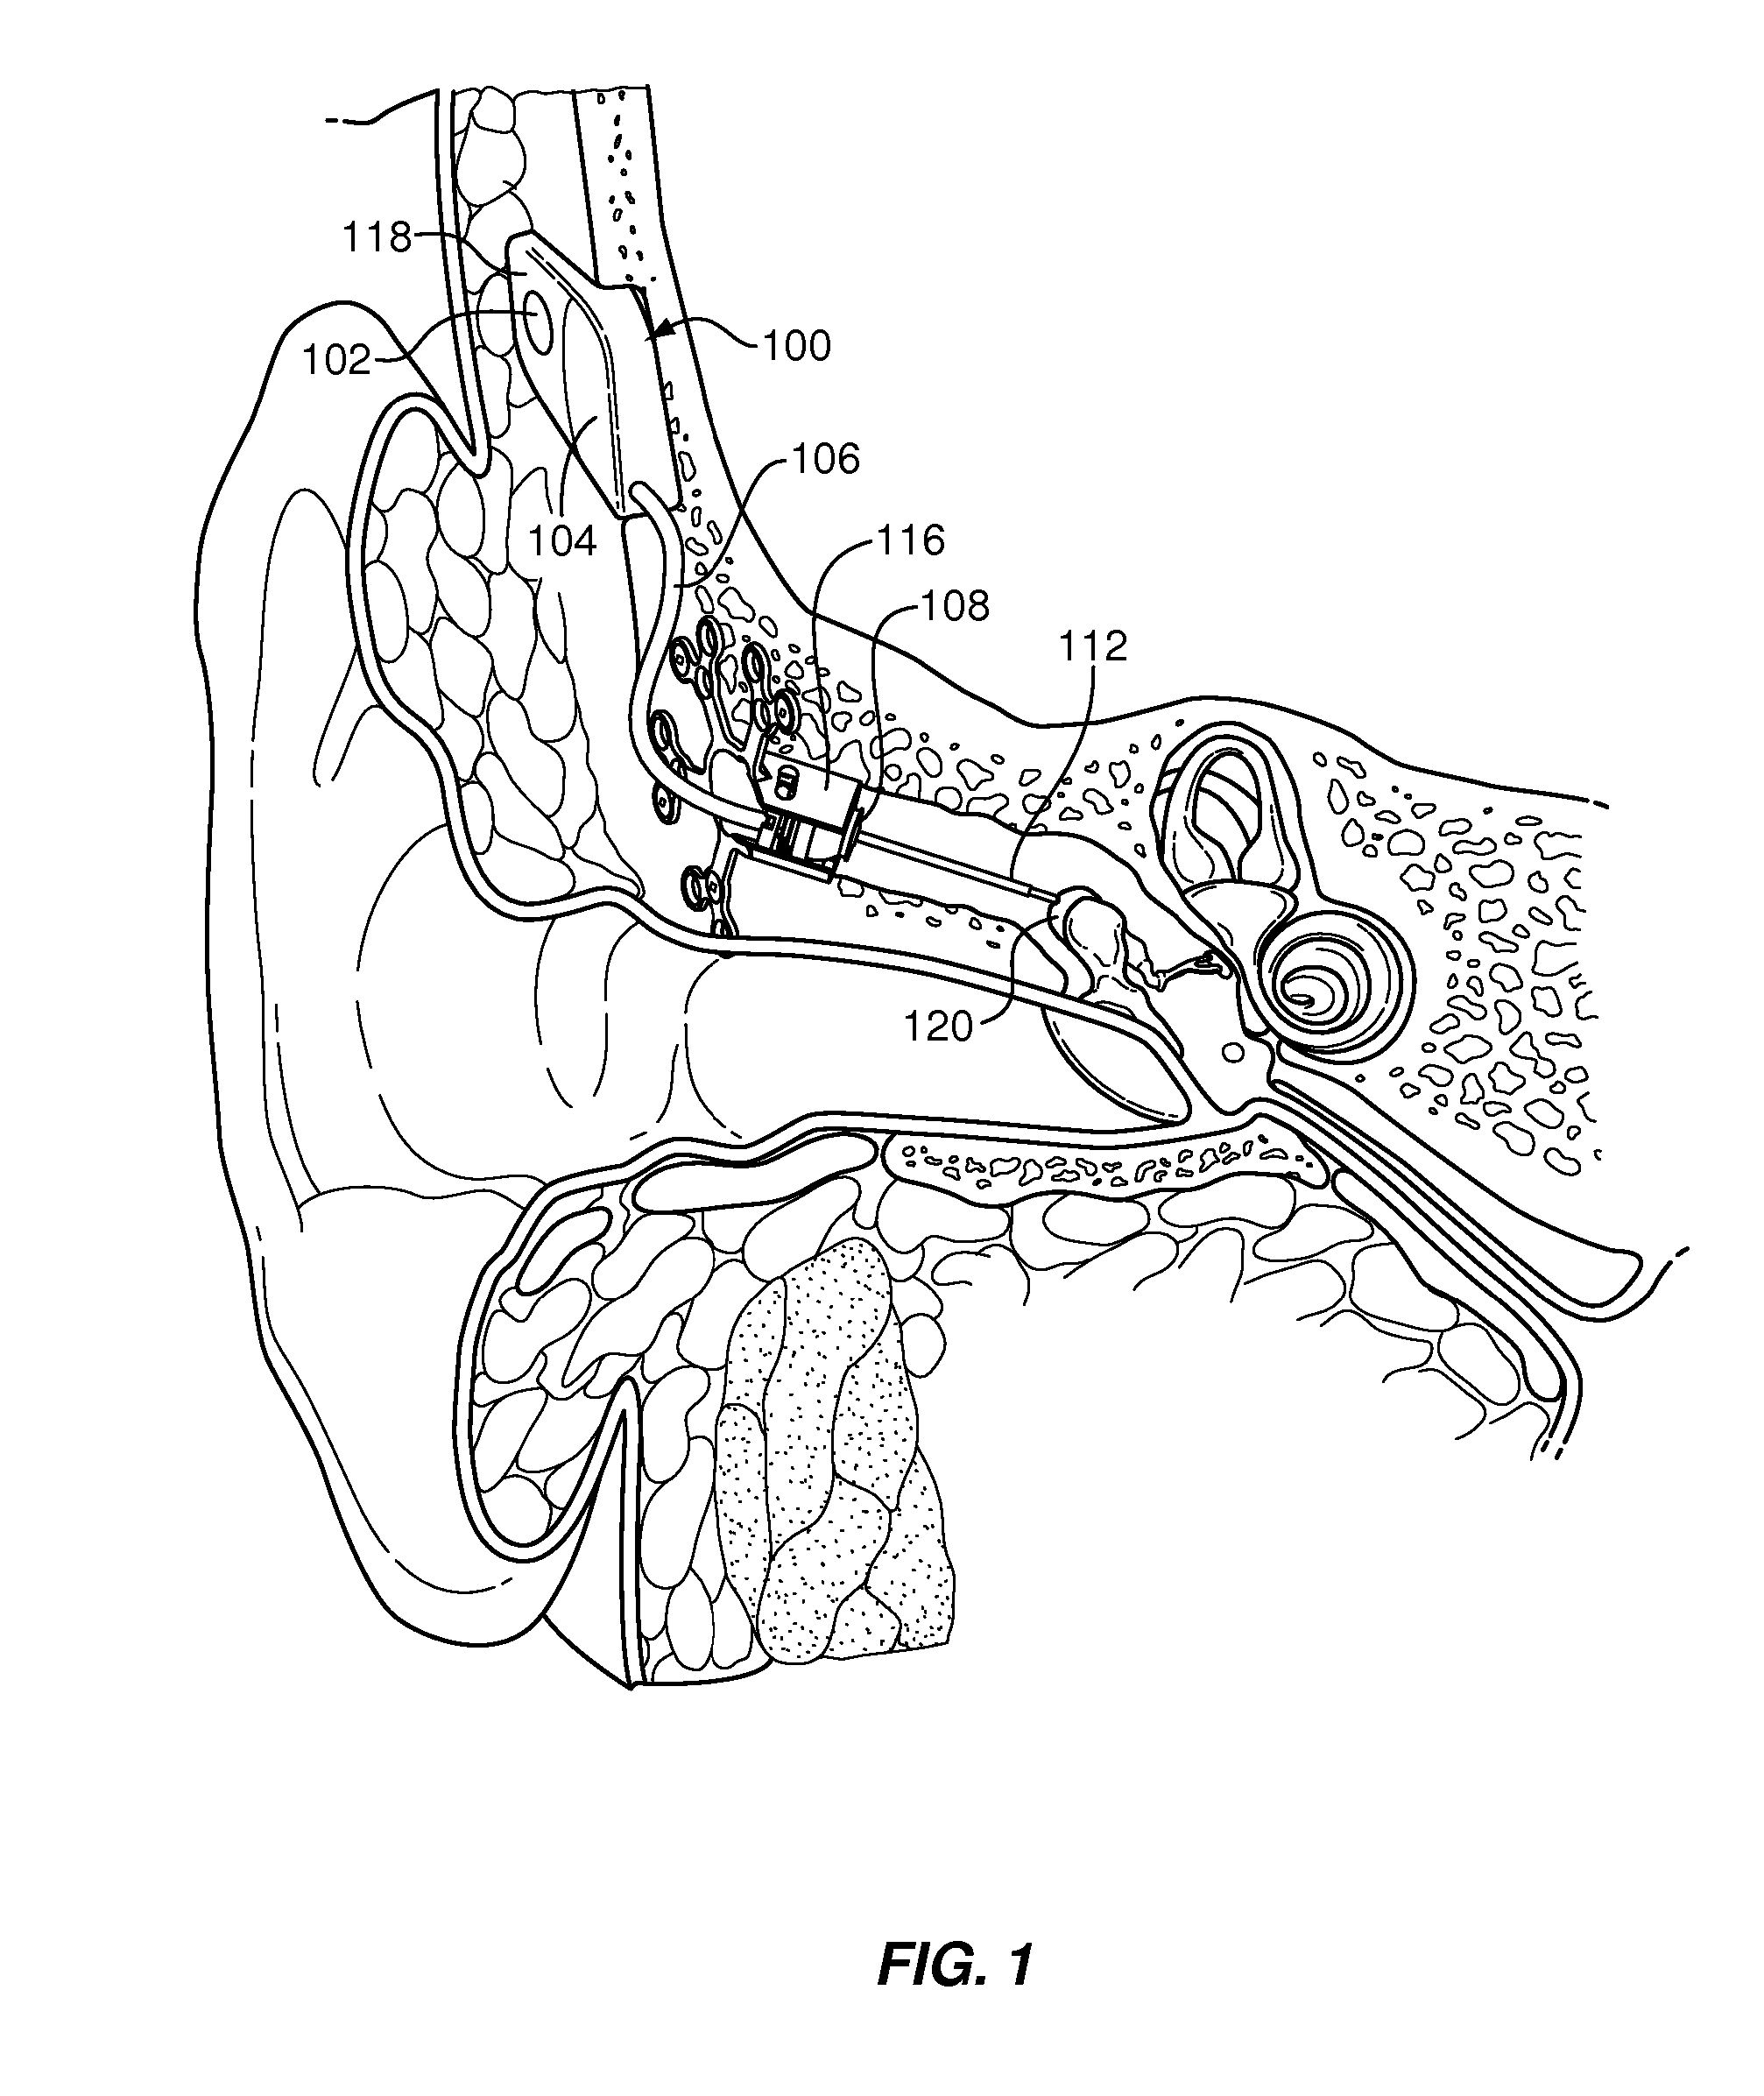 Simplified implantable hearing aid transducer apparatus